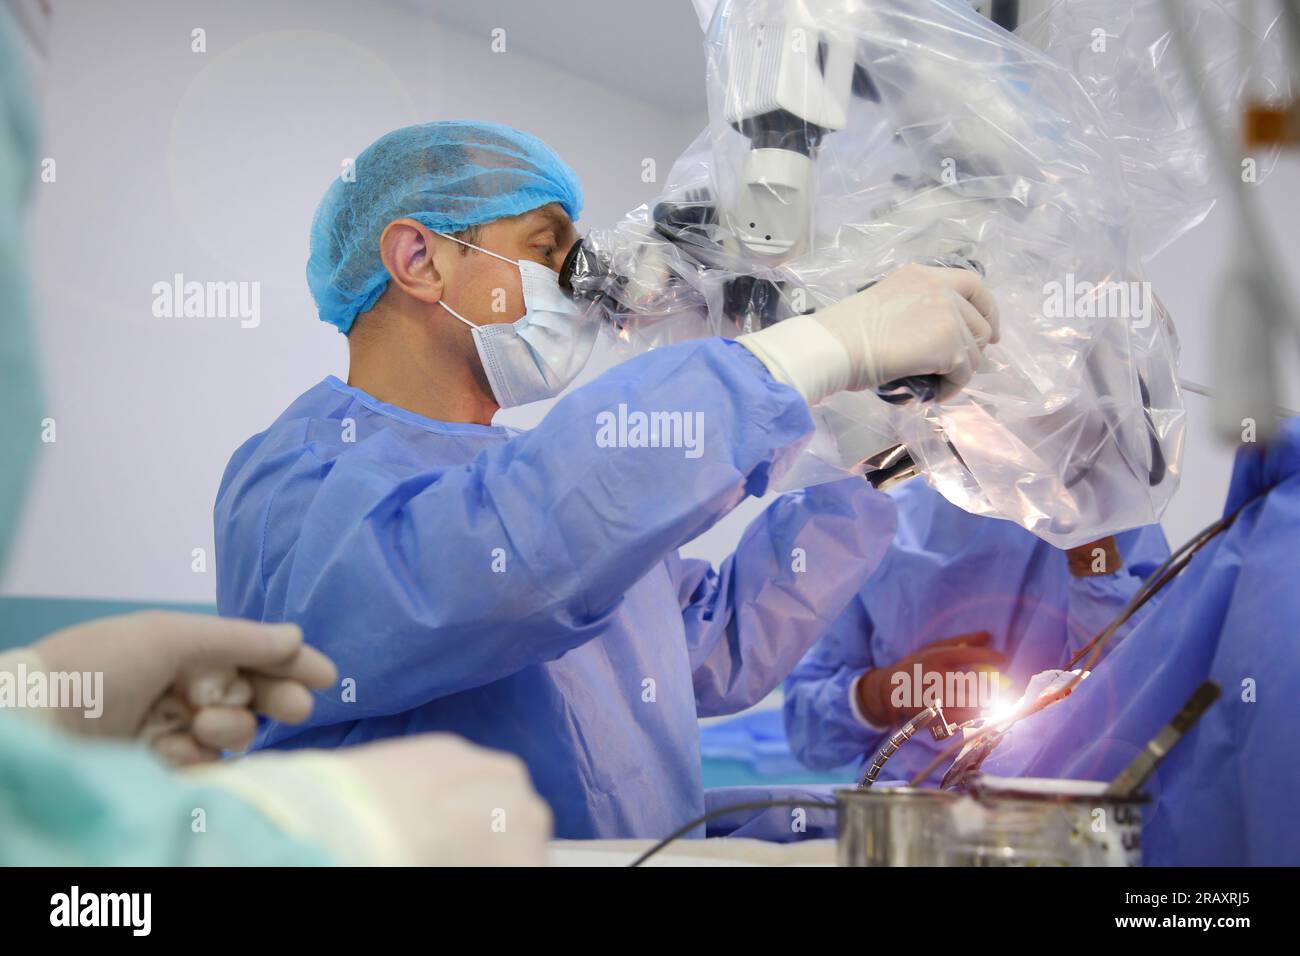 Treatment of a brain aneurysm. Surgical operation on the brain. A team ...